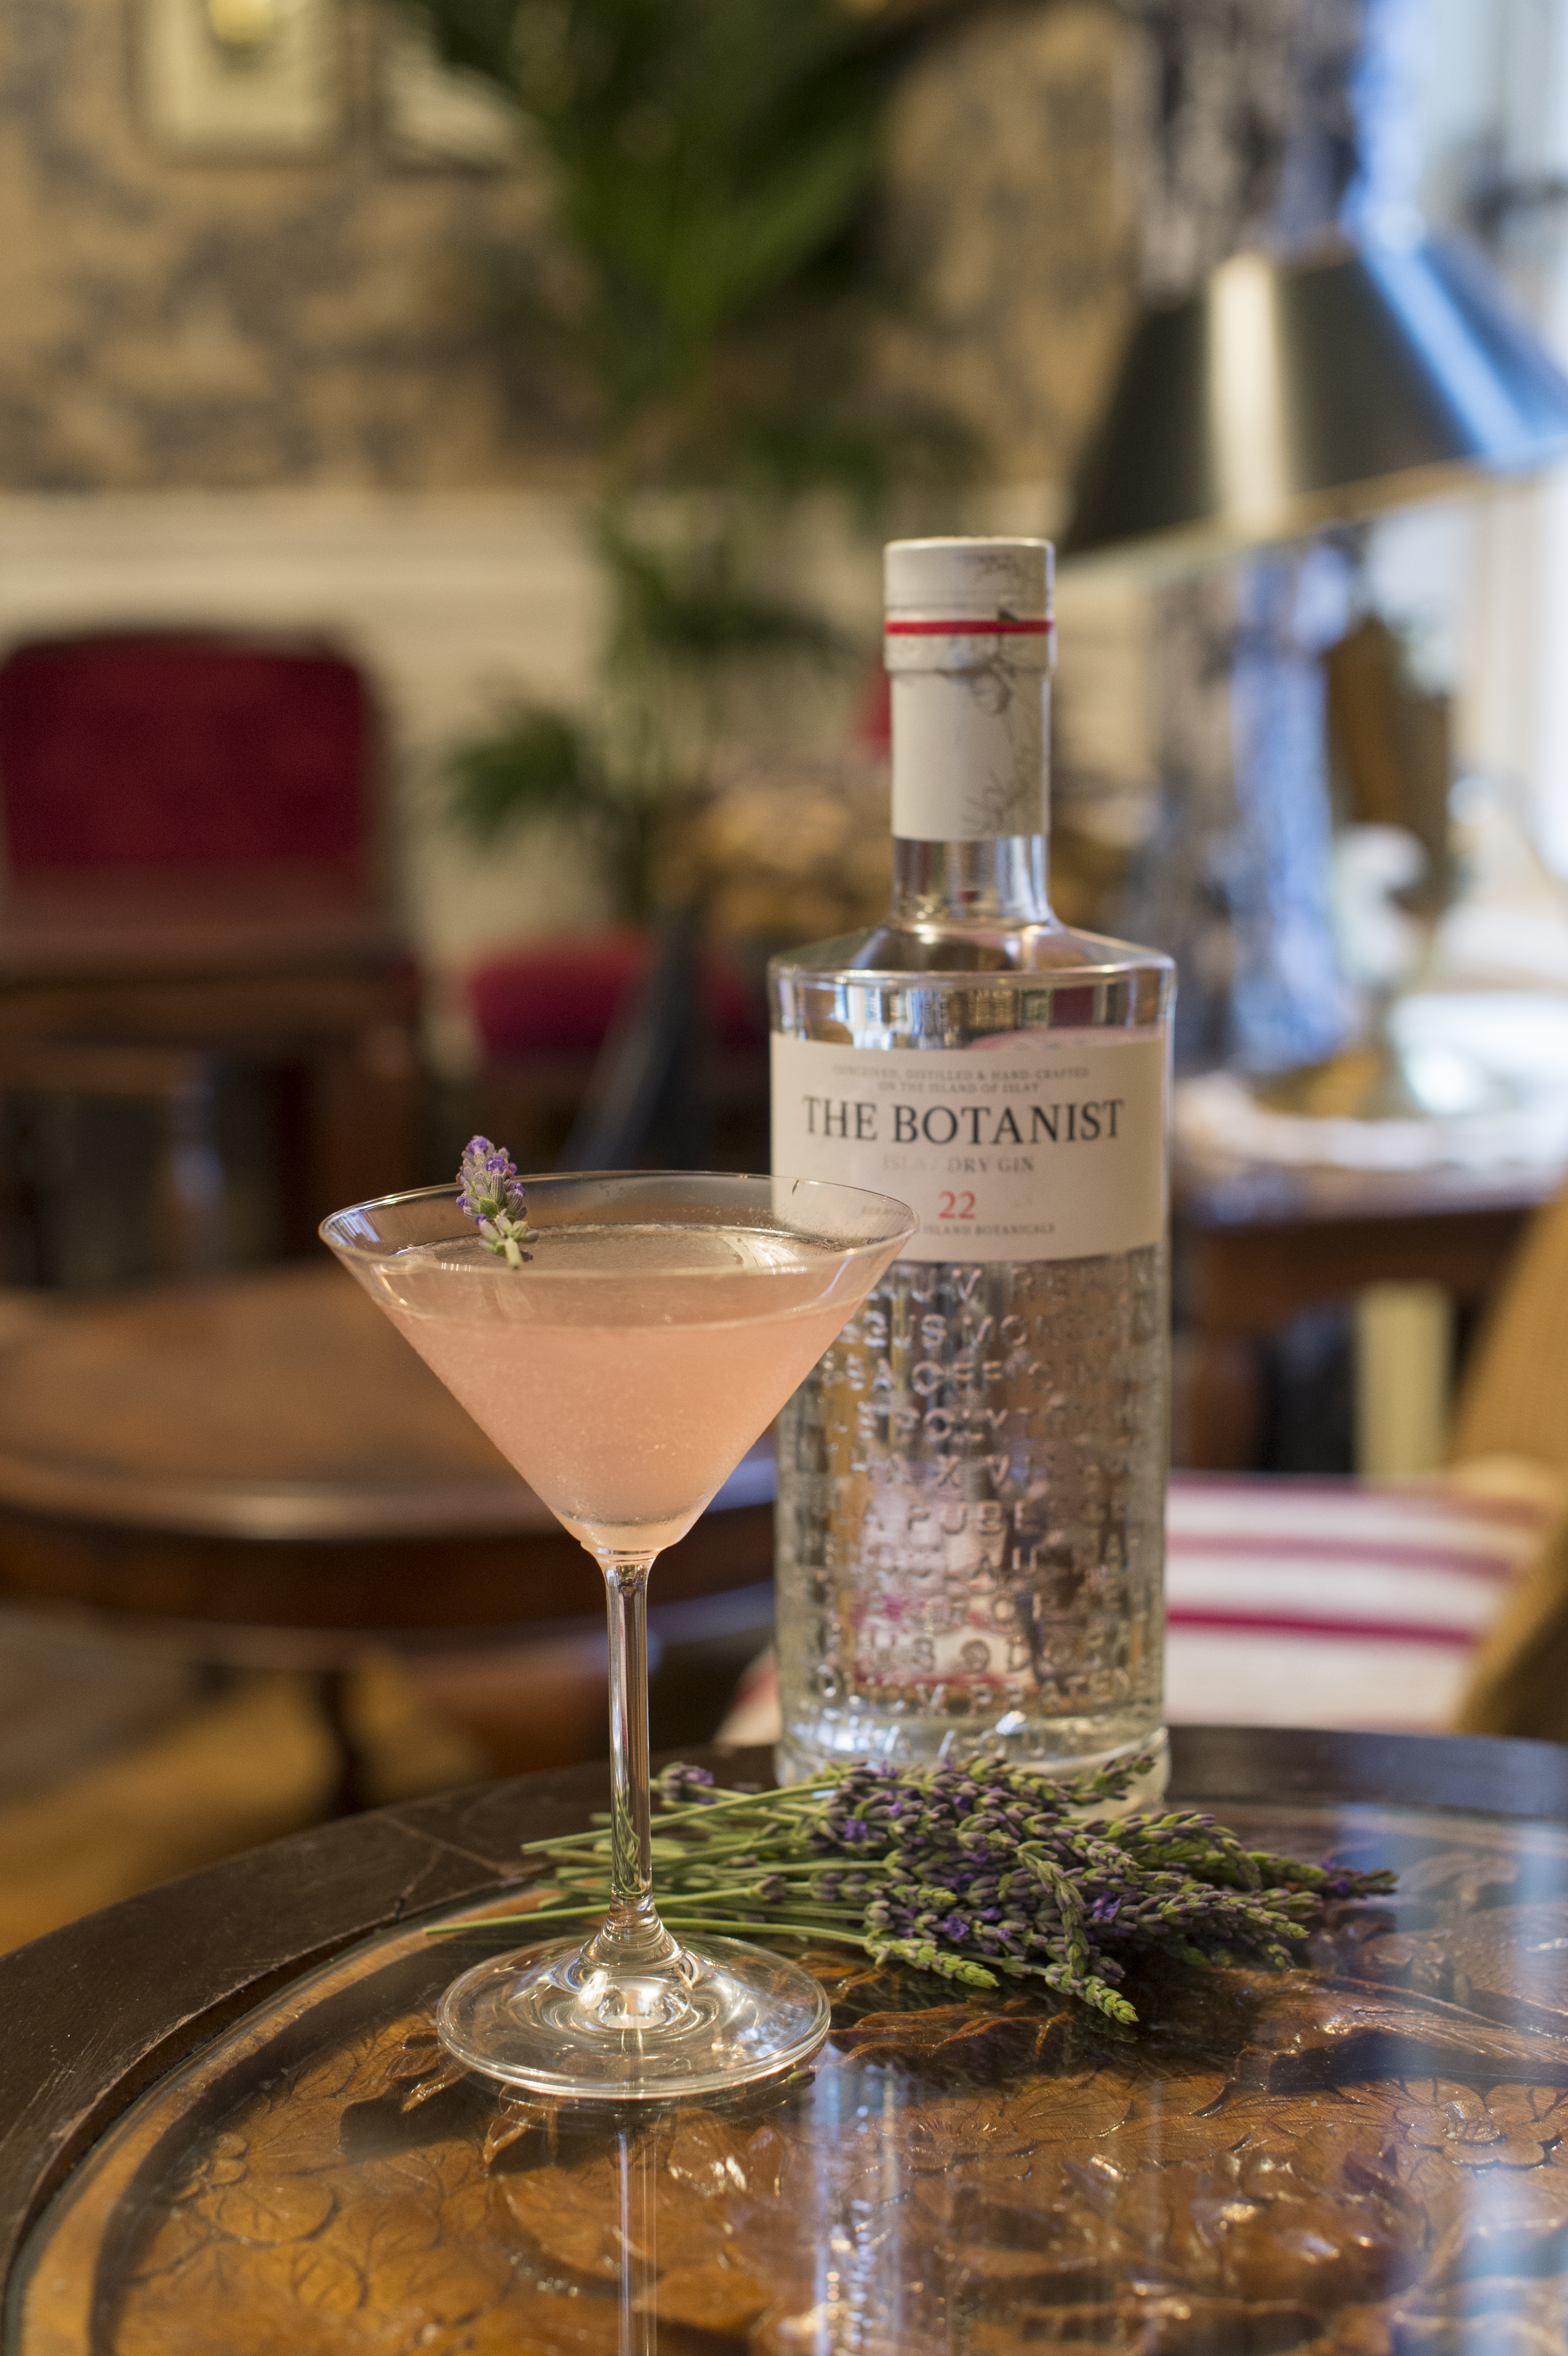 The Botanist - The First and Only Islay Dry Gin